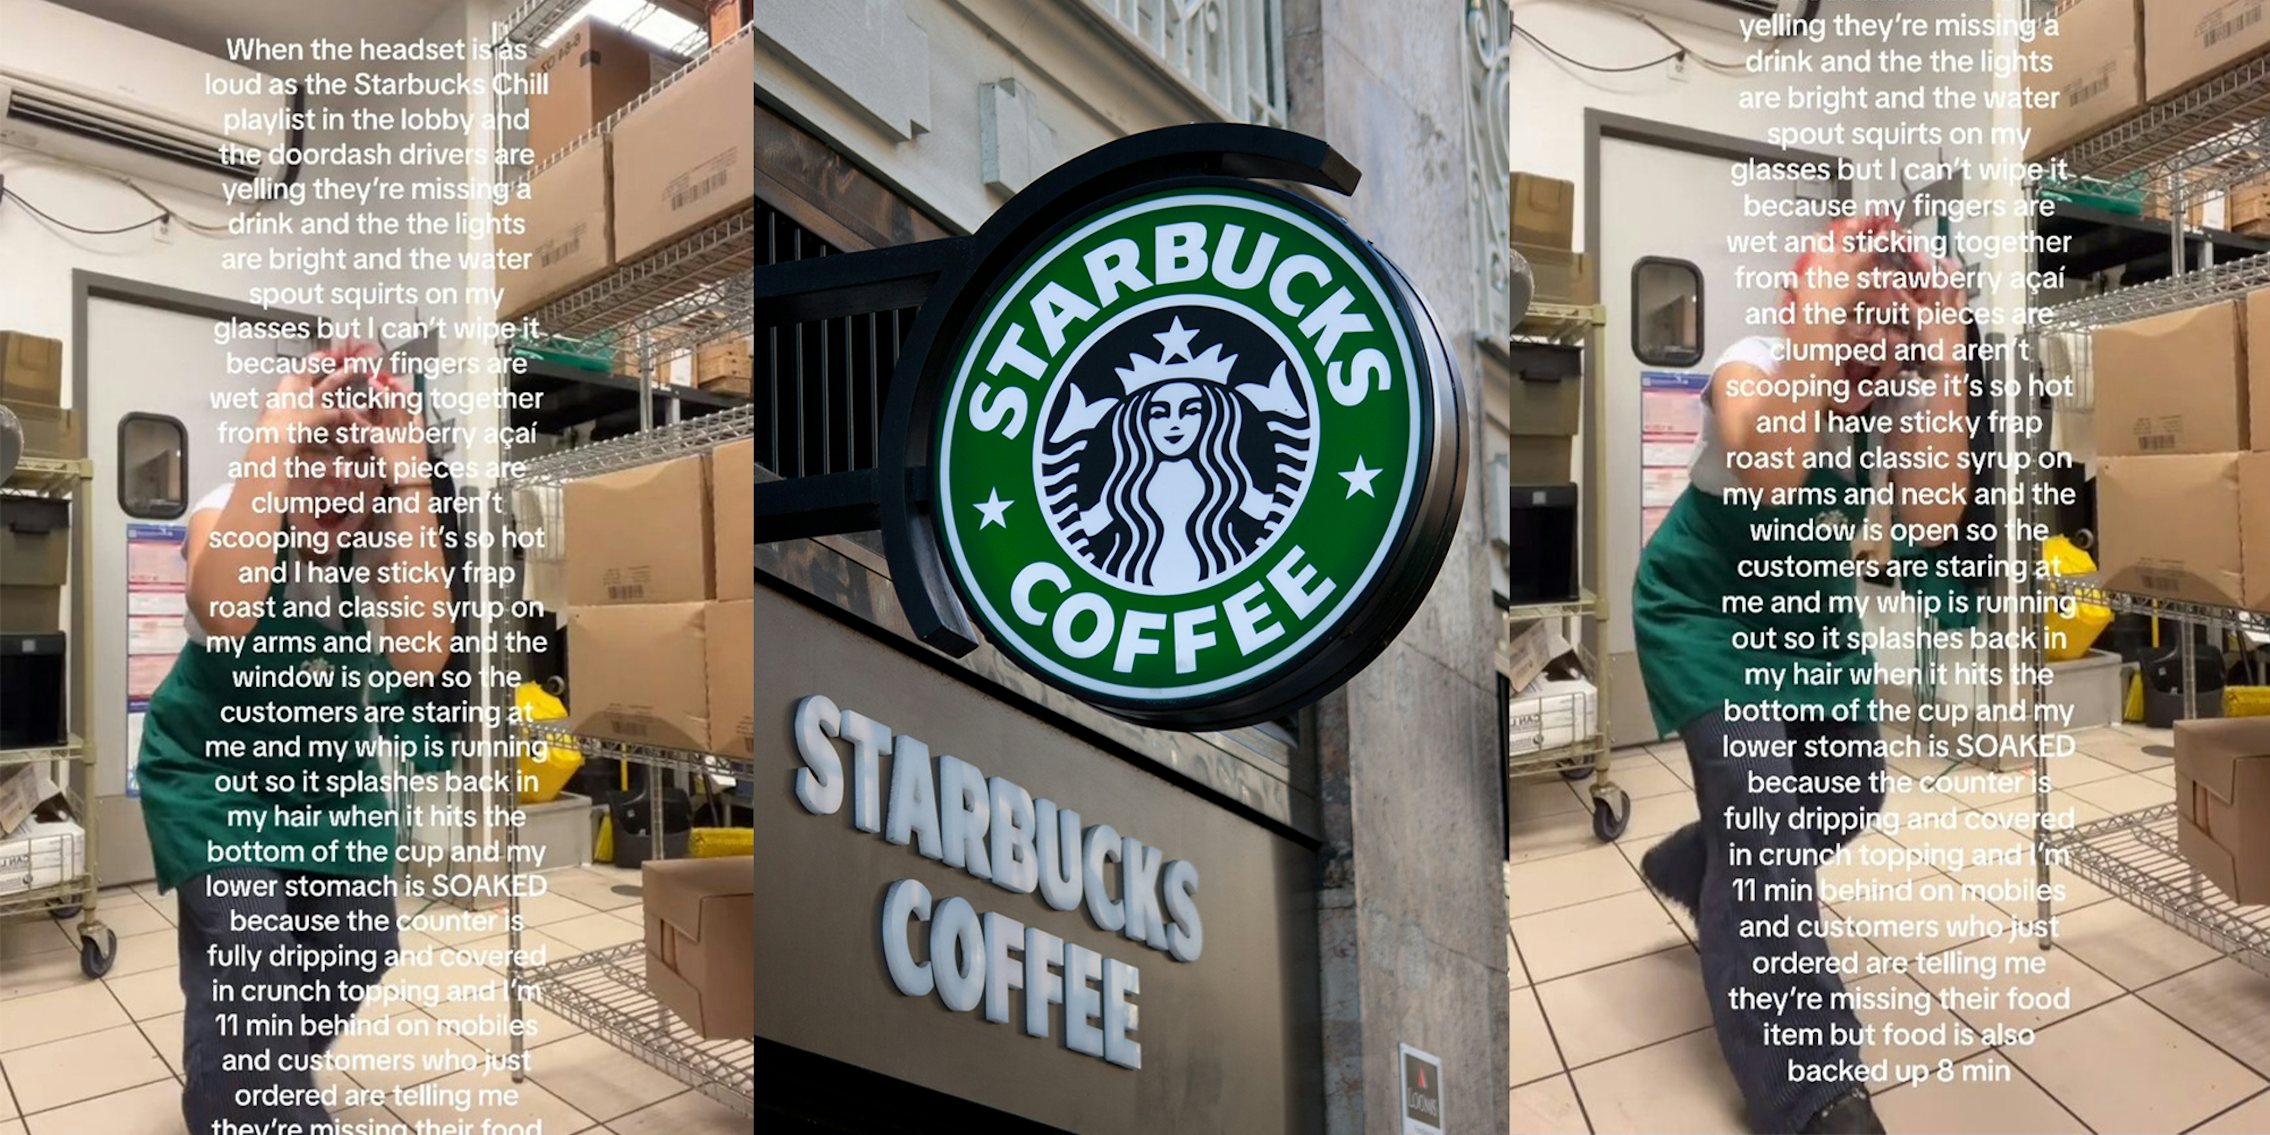 Starbucks barista carefully details a day in the life at her ‘overstimulating’ job